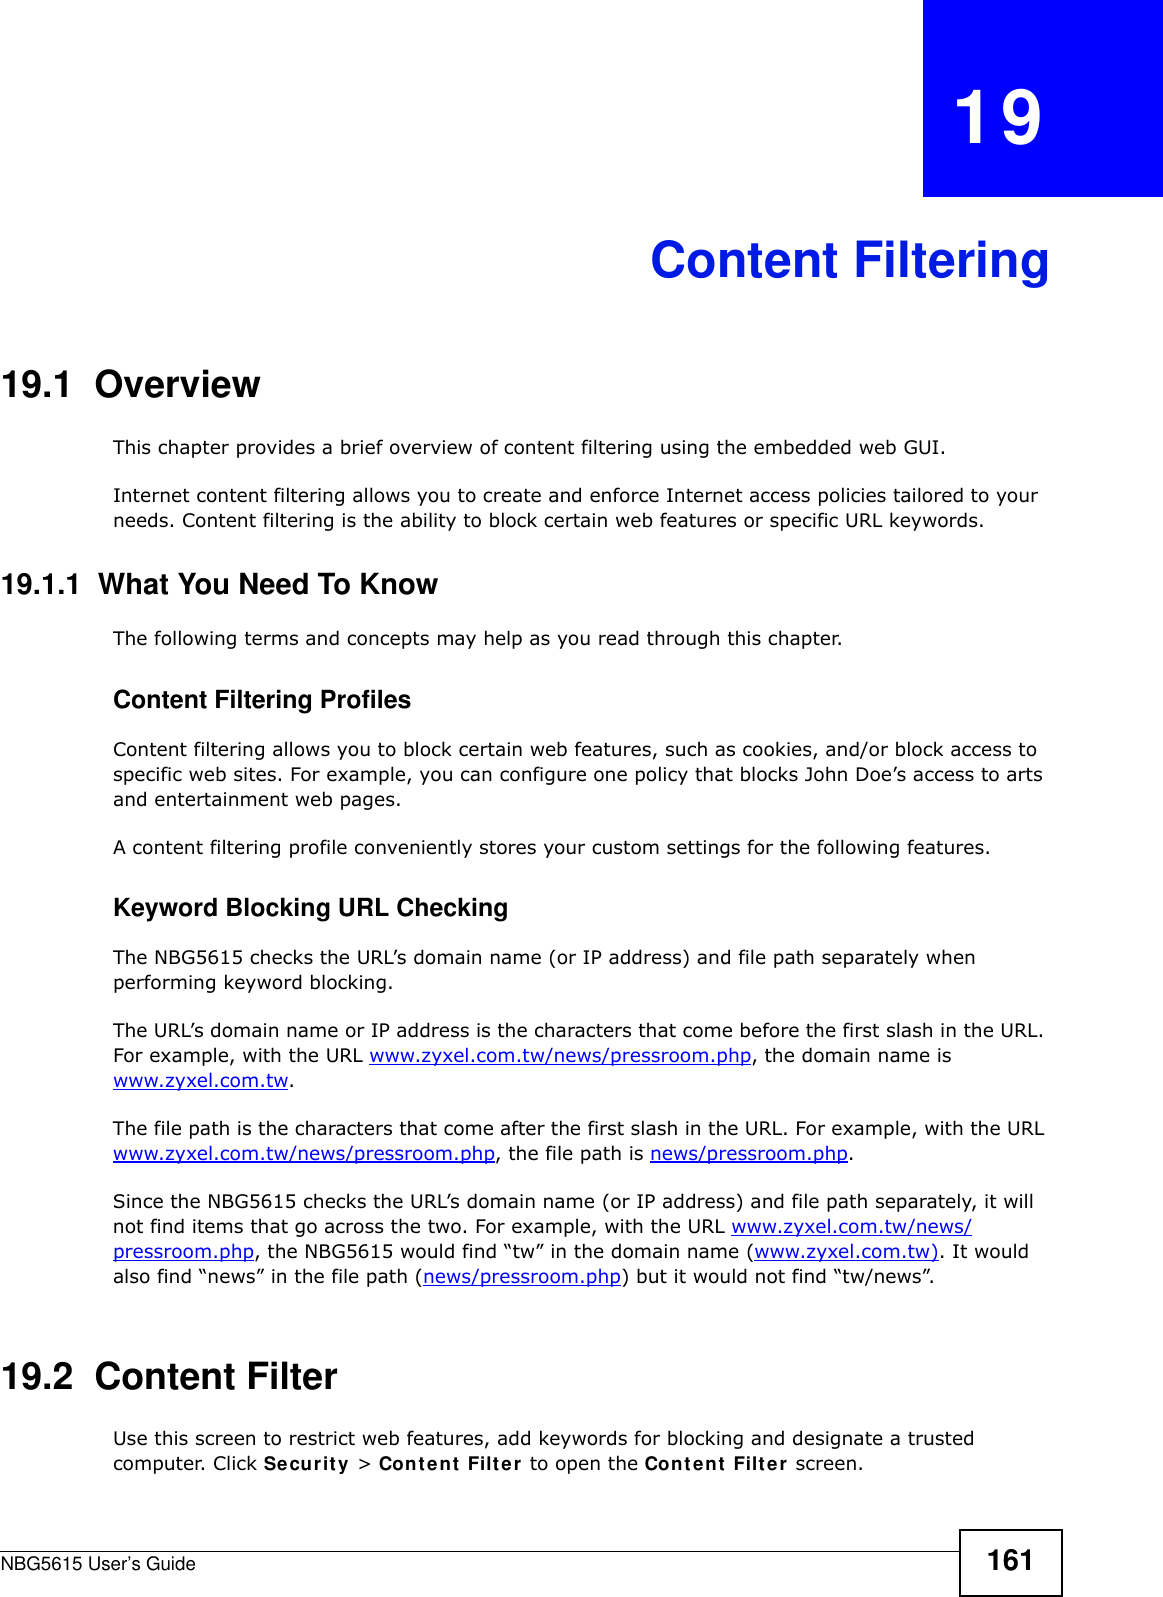 NBG5615 User’s Guide 161CHAPTER   19Content Filtering19.1  OverviewThis chapter provides a brief overview of content filtering using the embedded web GUI.Internet content filtering allows you to create and enforce Internet access policies tailored to your needs. Content filtering is the ability to block certain web features or specific URL keywords.19.1.1  What You Need To KnowThe following terms and concepts may help as you read through this chapter.Content Filtering ProfilesContent filtering allows you to block certain web features, such as cookies, and/or block access to specific web sites. For example, you can configure one policy that blocks John Doe’s access to arts and entertainment web pages.A content filtering profile conveniently stores your custom settings for the following features.Keyword Blocking URL CheckingThe NBG5615 checks the URL’s domain name (or IP address) and file path separately when performing keyword blocking. The URL’s domain name or IP address is the characters that come before the first slash in the URL. For example, with the URL www.zyxel.com.tw/news/pressroom.php, the domain name is www.zyxel.com.tw.The file path is the characters that come after the first slash in the URL. For example, with the URL www.zyxel.com.tw/news/pressroom.php, the file path is news/pressroom.php.Since the NBG5615 checks the URL’s domain name (or IP address) and file path separately, it will not find items that go across the two. For example, with the URL www.zyxel.com.tw/news/pressroom.php, the NBG5615 would find “tw” in the domain name (www.zyxel.com.tw). It would also find “news” in the file path (news/pressroom.php) but it would not find “tw/news”.19.2  Content FilterUse this screen to restrict web features, add keywords for blocking and designate a trusted computer. Click Security &gt; Content Filter to open the Content Filter screen. 